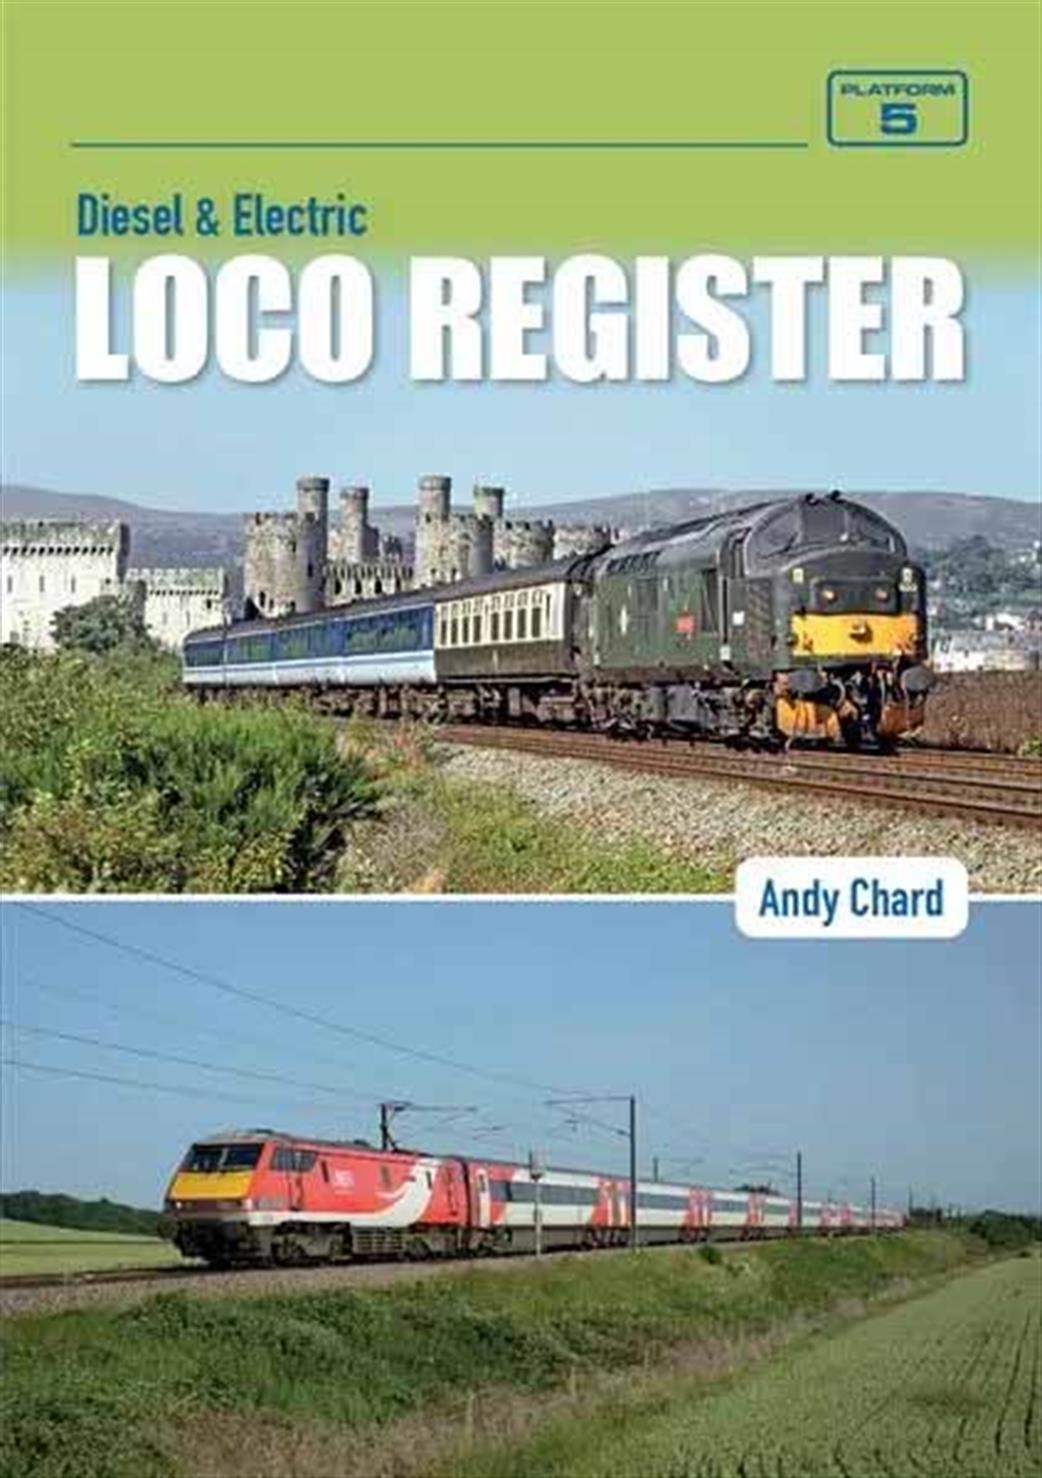 Platform 5 loco reg Diesel and Electric Loco Register 5th Edition by Andy Chard